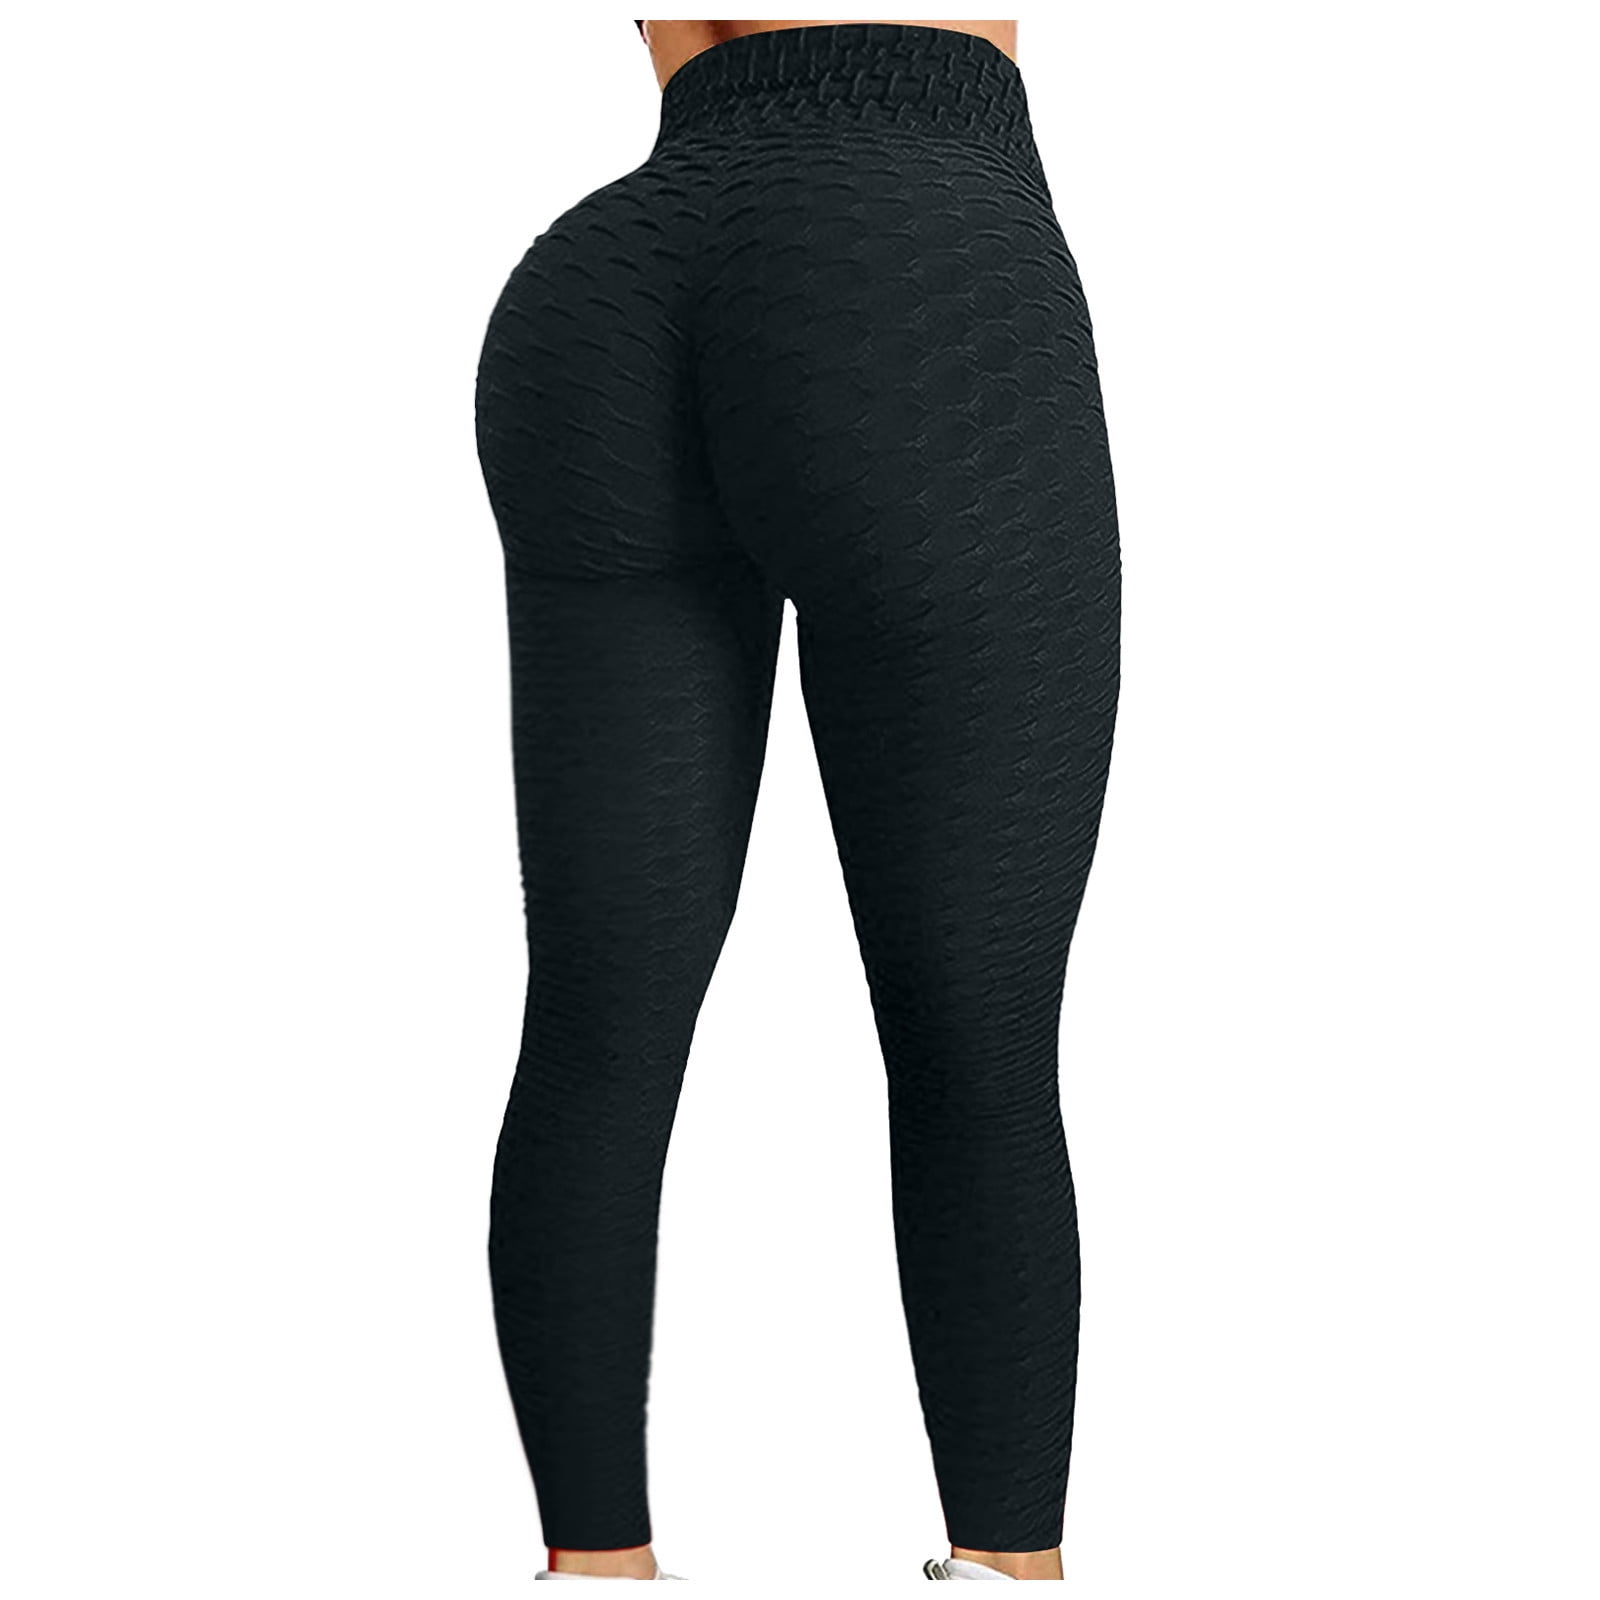 KaLI_store Womens Pants Tummy Control Workout Leggings with Pockets High  Waist Yoga Pants for Women Running, Hiking Black,L